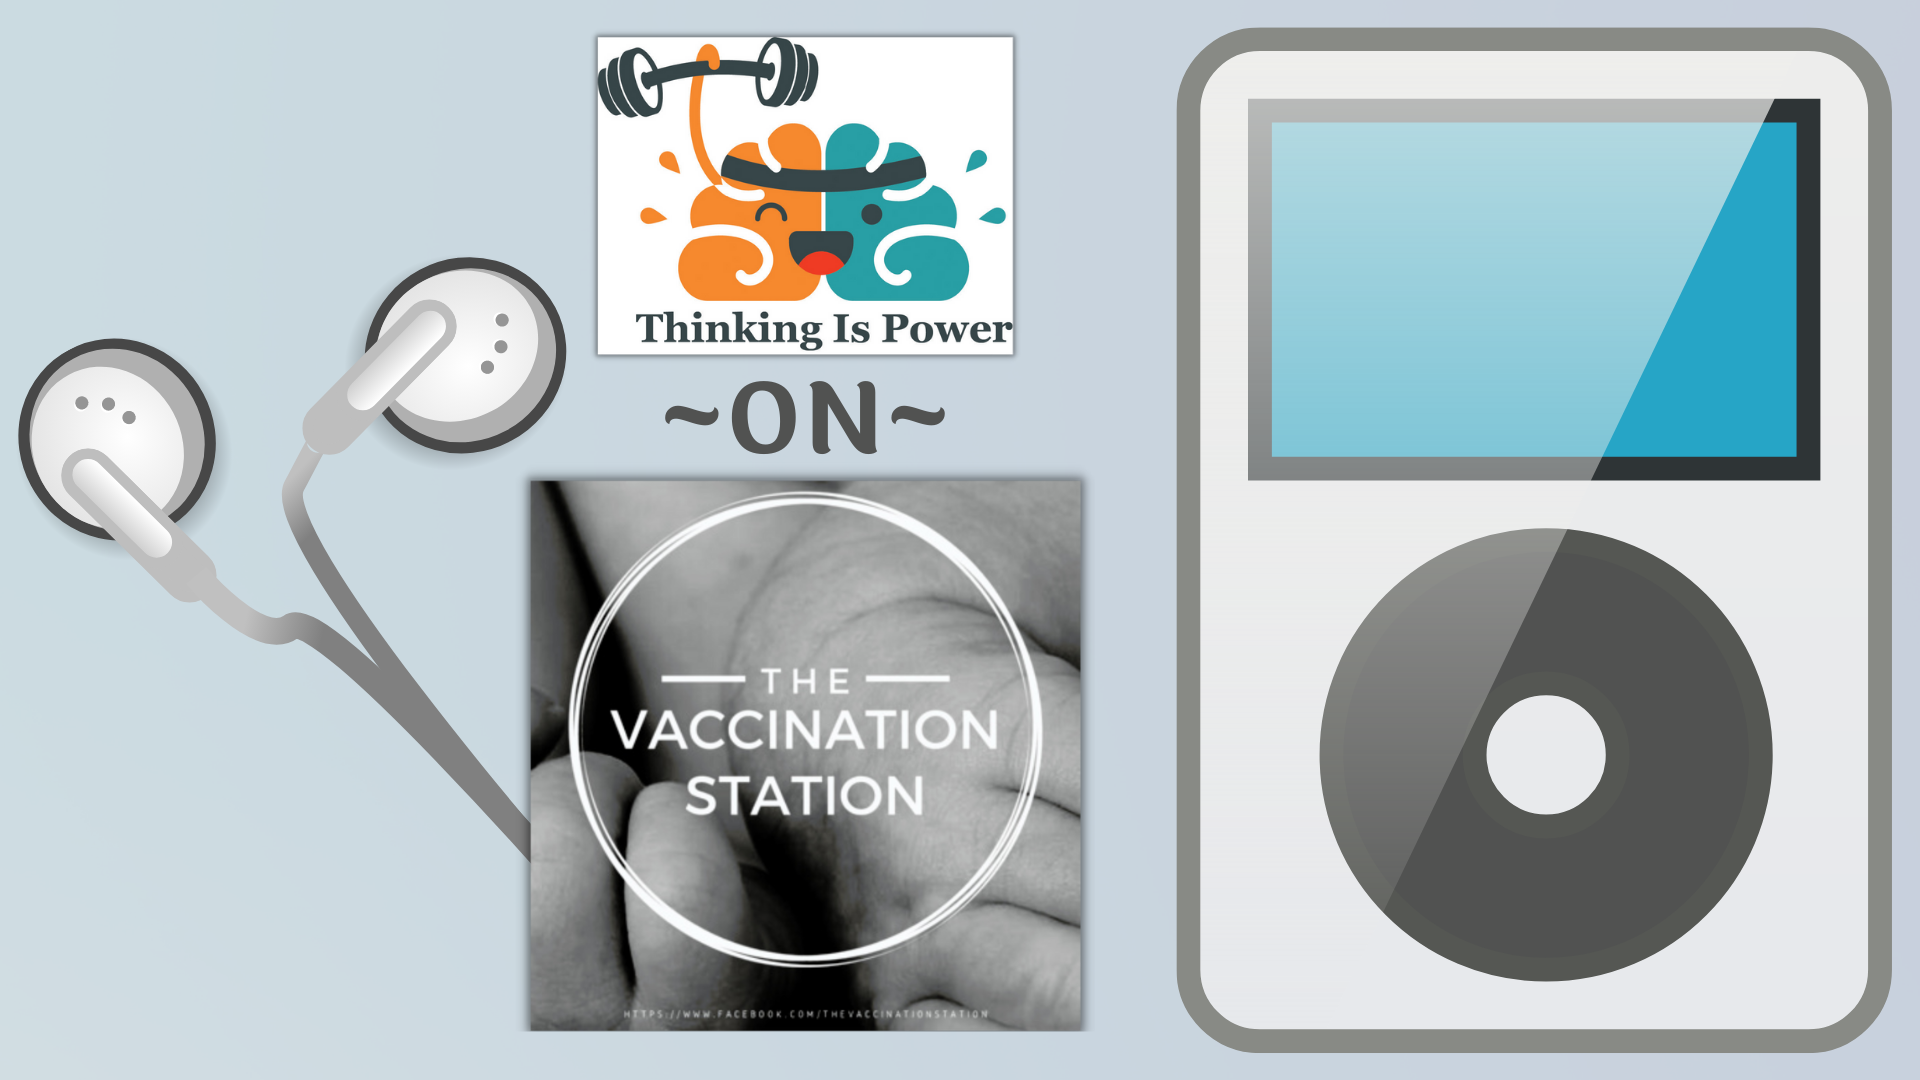 Melanie Trecek-King of Thinking Is Power on the Vaccination Station Podcast